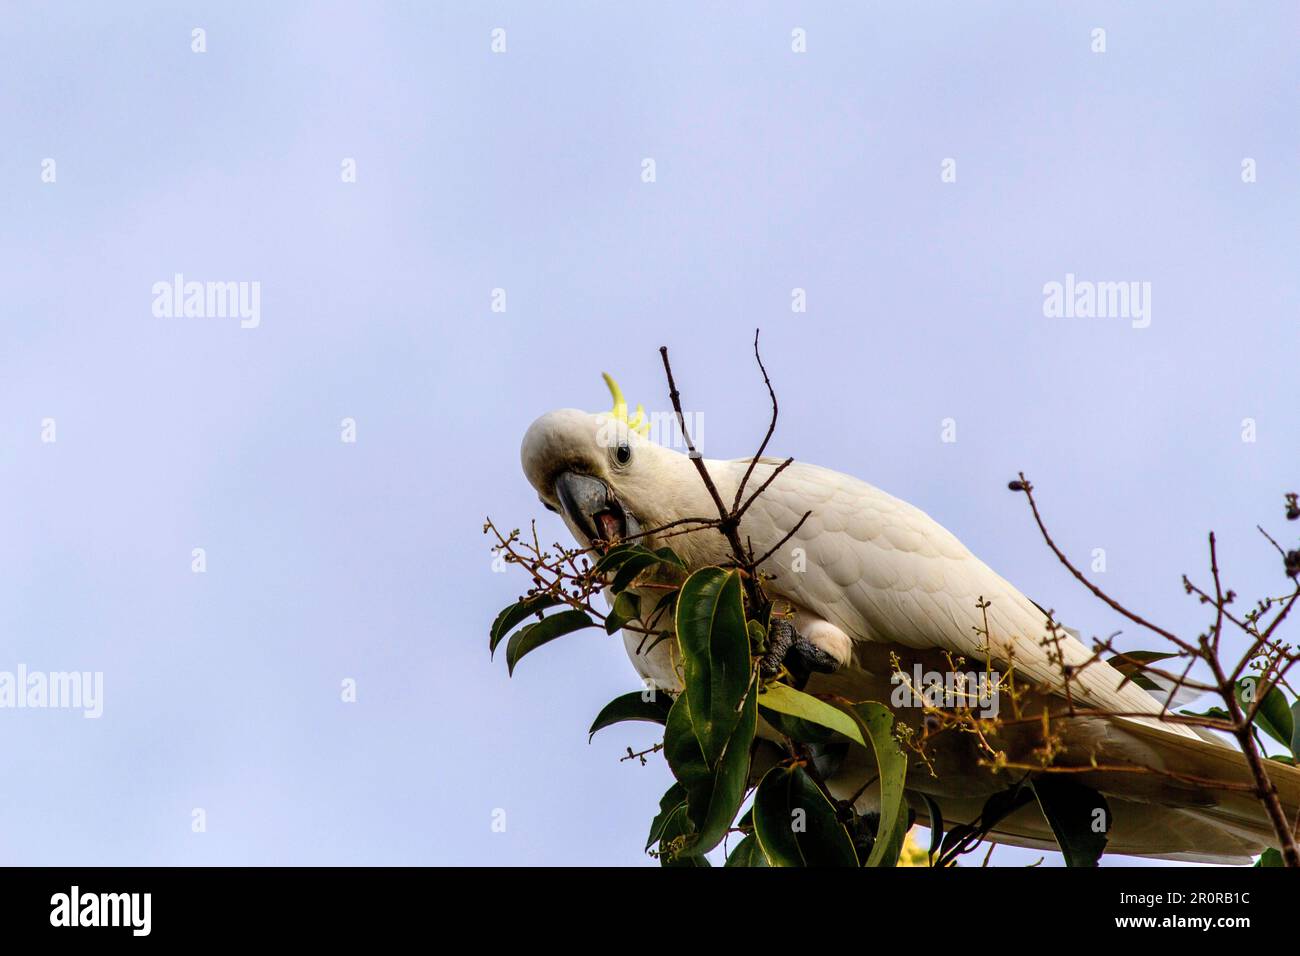 May 8, 2023, Sydney, New South Wales, Australia: Sulphur-Crested Cockatoos (Cacatua galerita) eating fruits from a tree in Sydney, New South Wales, Australia. The Sulphur-Crested Cockatoo is a relatively large white cockatoo with a spectacular plumed yellow crest and dark bill. It is found in wooded habitats in Australia, New Guinea, and some of the islands of Indonesia. Sulphur Crested Cockatoos have multiple subspecies like Lesser, Medium, and Greater Sulphur Crested Cockatoo; all belong to the same Genus (Cacatua) and Phylum. Since all subspecies of Sulphur Crested cockatoos look very simil Stock Photo